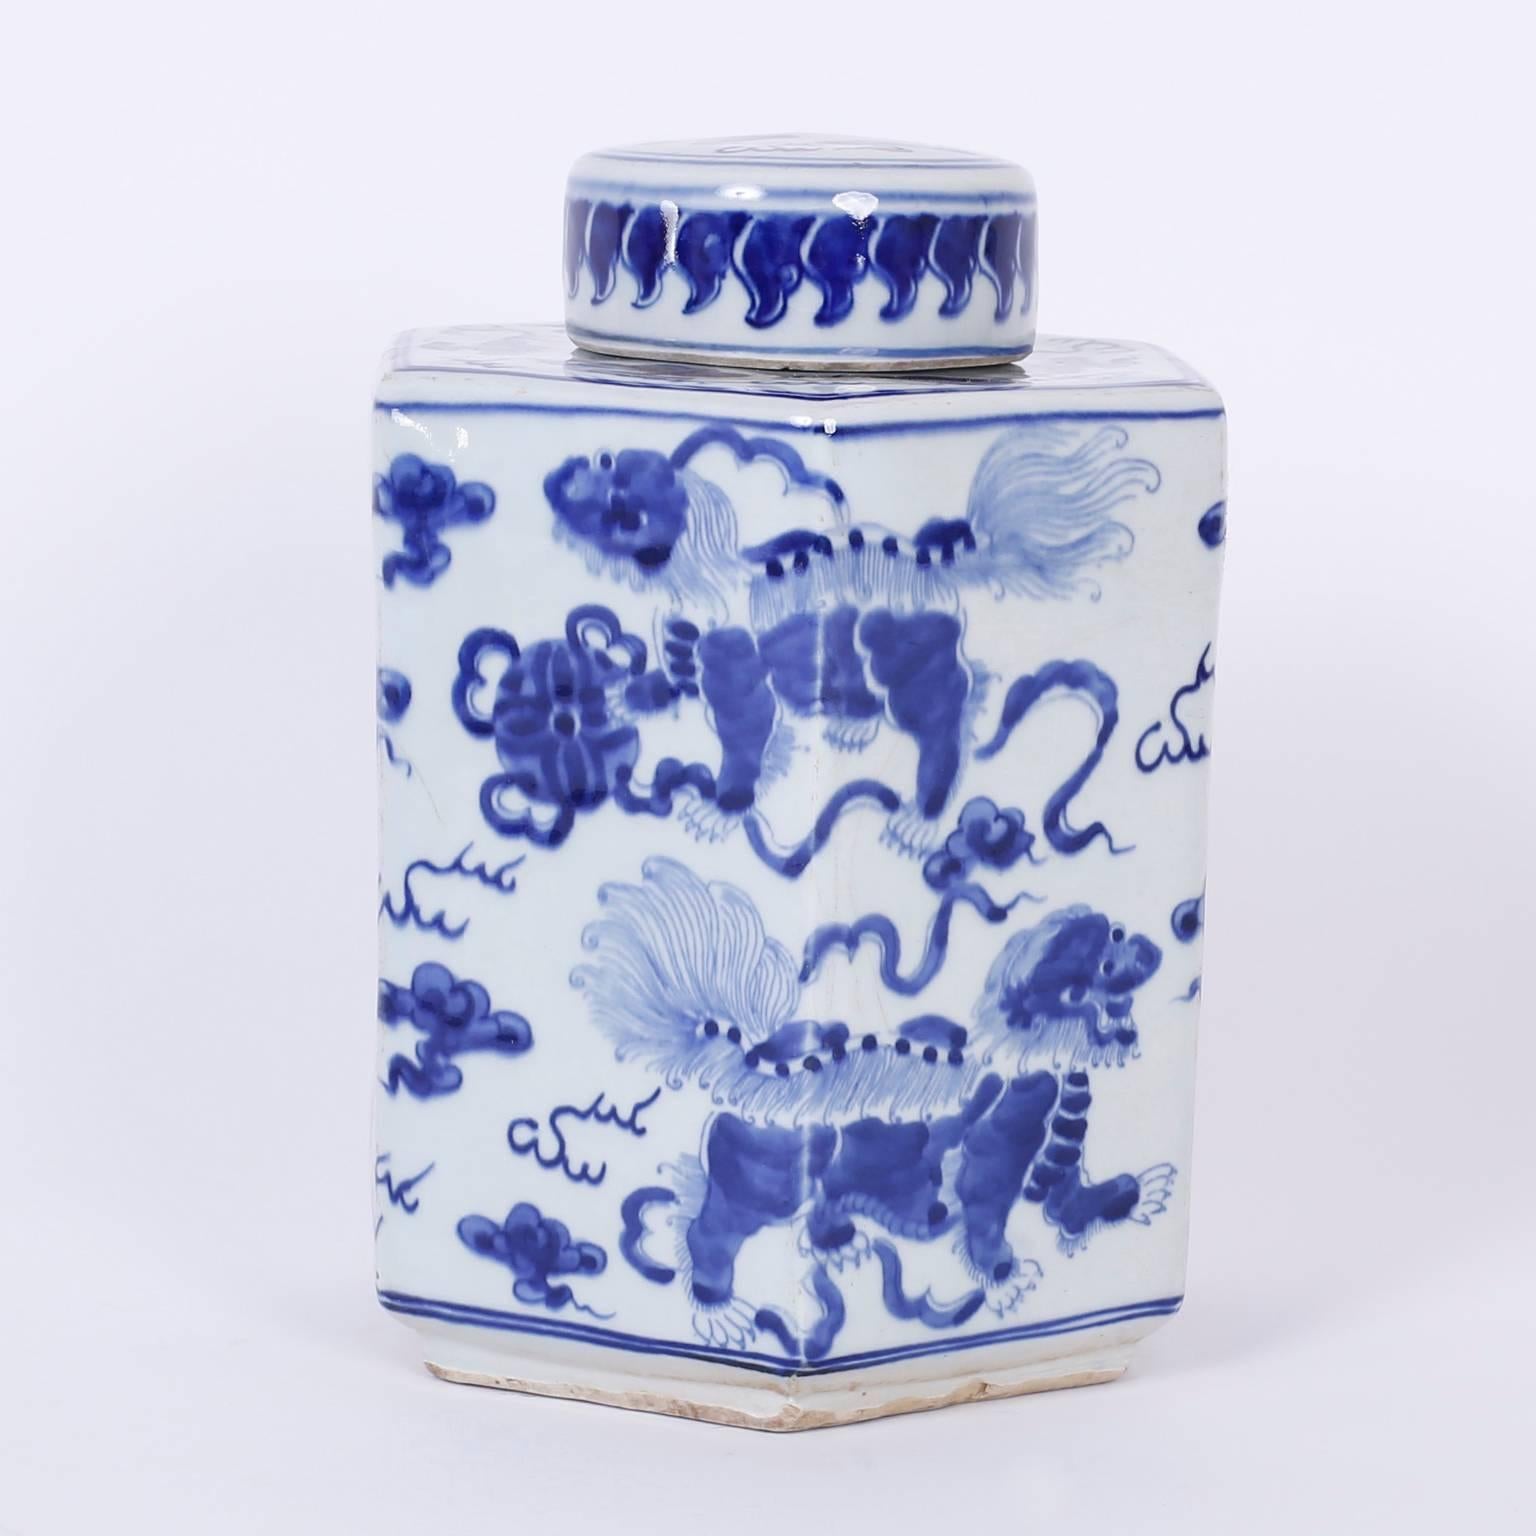 Spirited pair of Chinese export porcelain style tea leaf jars decorated in the Classic blue and white with foods and flowers. The containers are hexagon shaped with round lids.